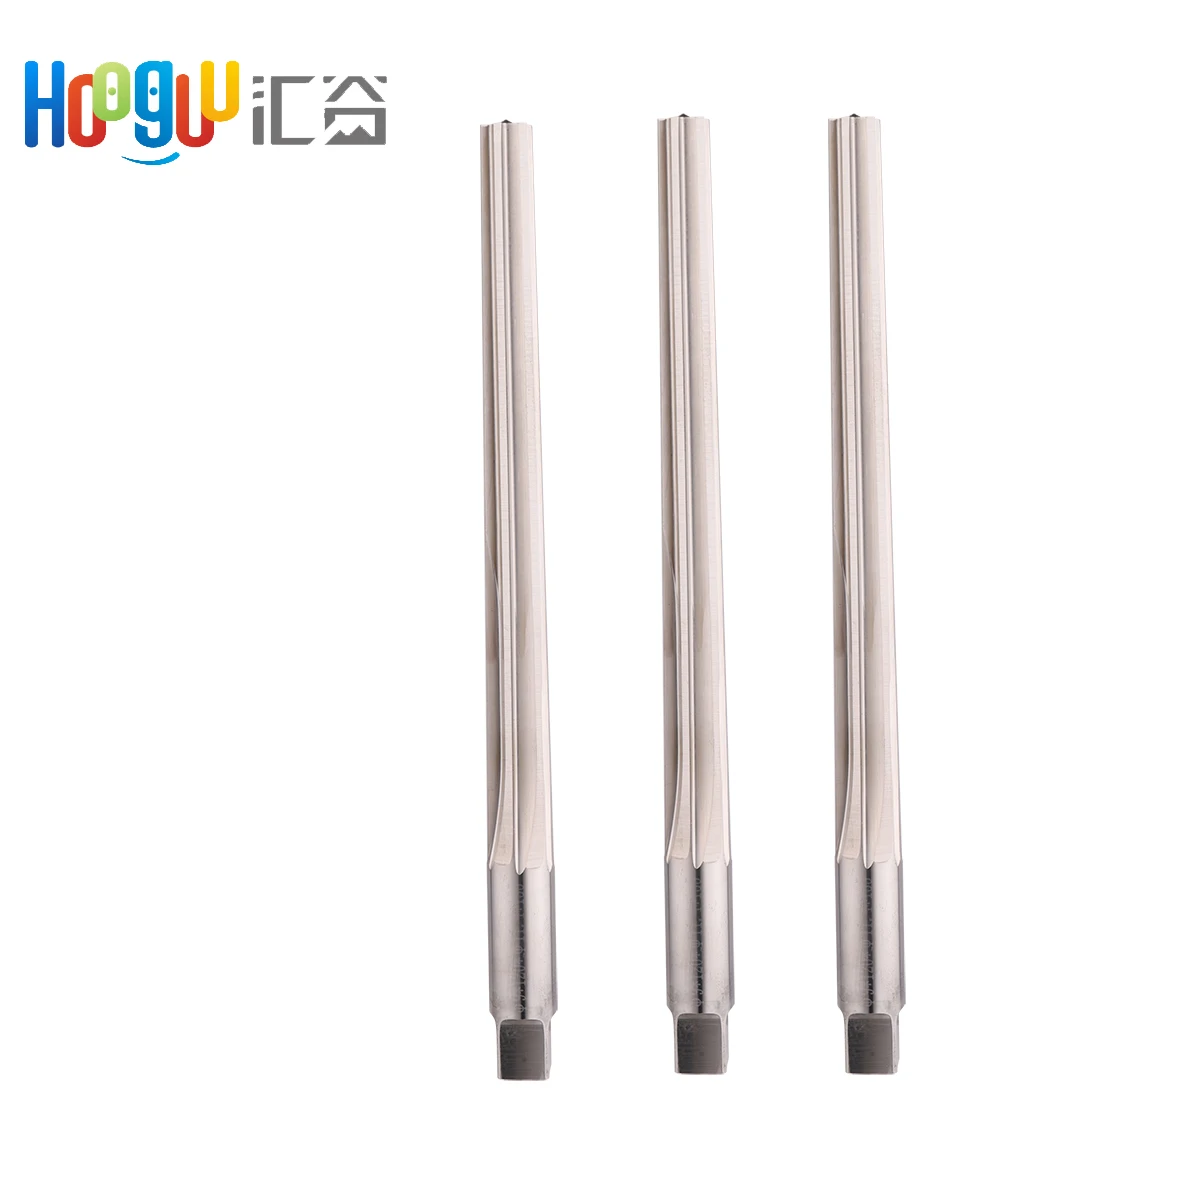 High Quality Tungsten Steel Straight Flute 1:50 Taper Pin Reamer Hand Reamers